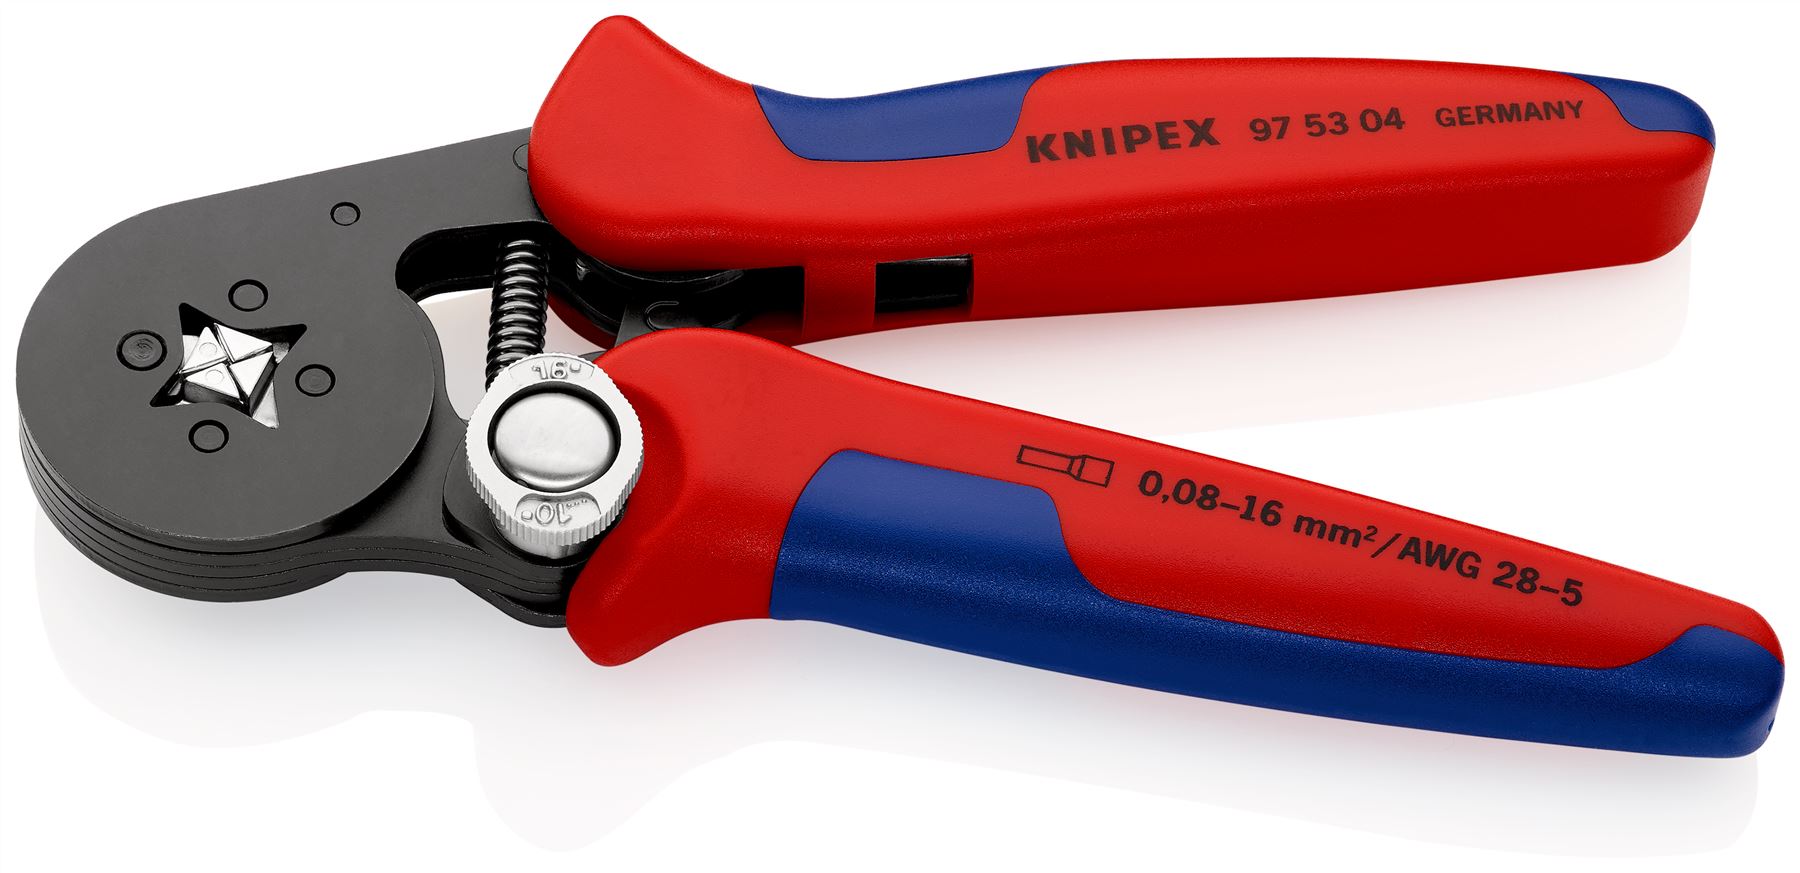 KNIPEX Self Adjusting Crimping Pliers for Wire Ferrules with Lateral Access 0.08-16mm² 180mm Multi Component Grips 97 53 04